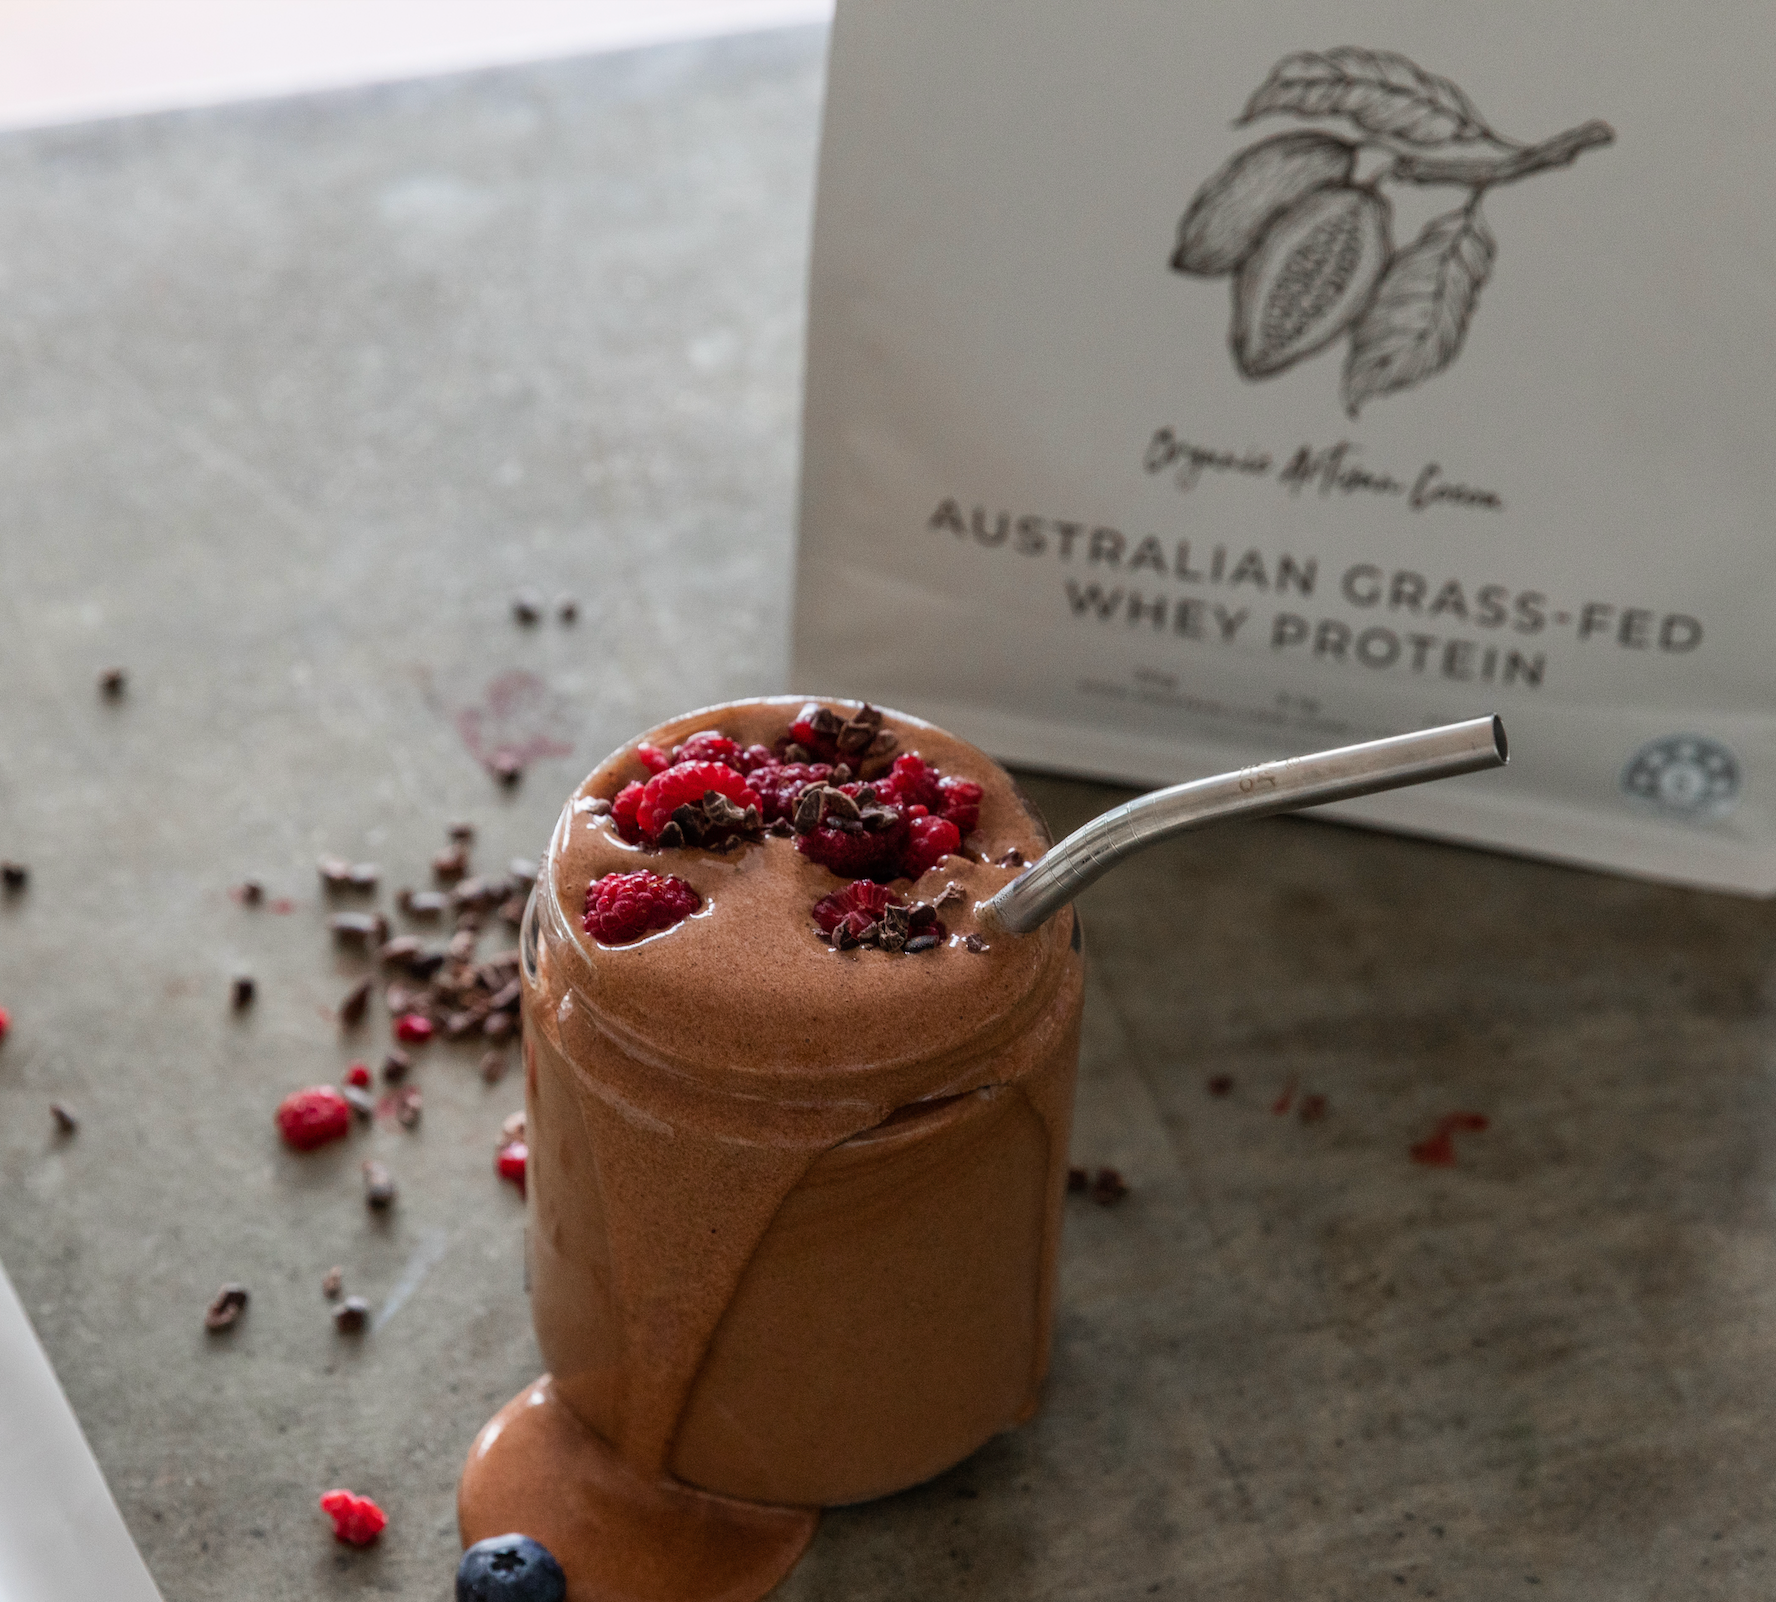 A Glass of mixed Chocolate cacao whey protein powder with rasberries and dark chocolate, with Australian Natural Protein Company Packaging of the Organic Cocoa Protein Powder flavour in the background